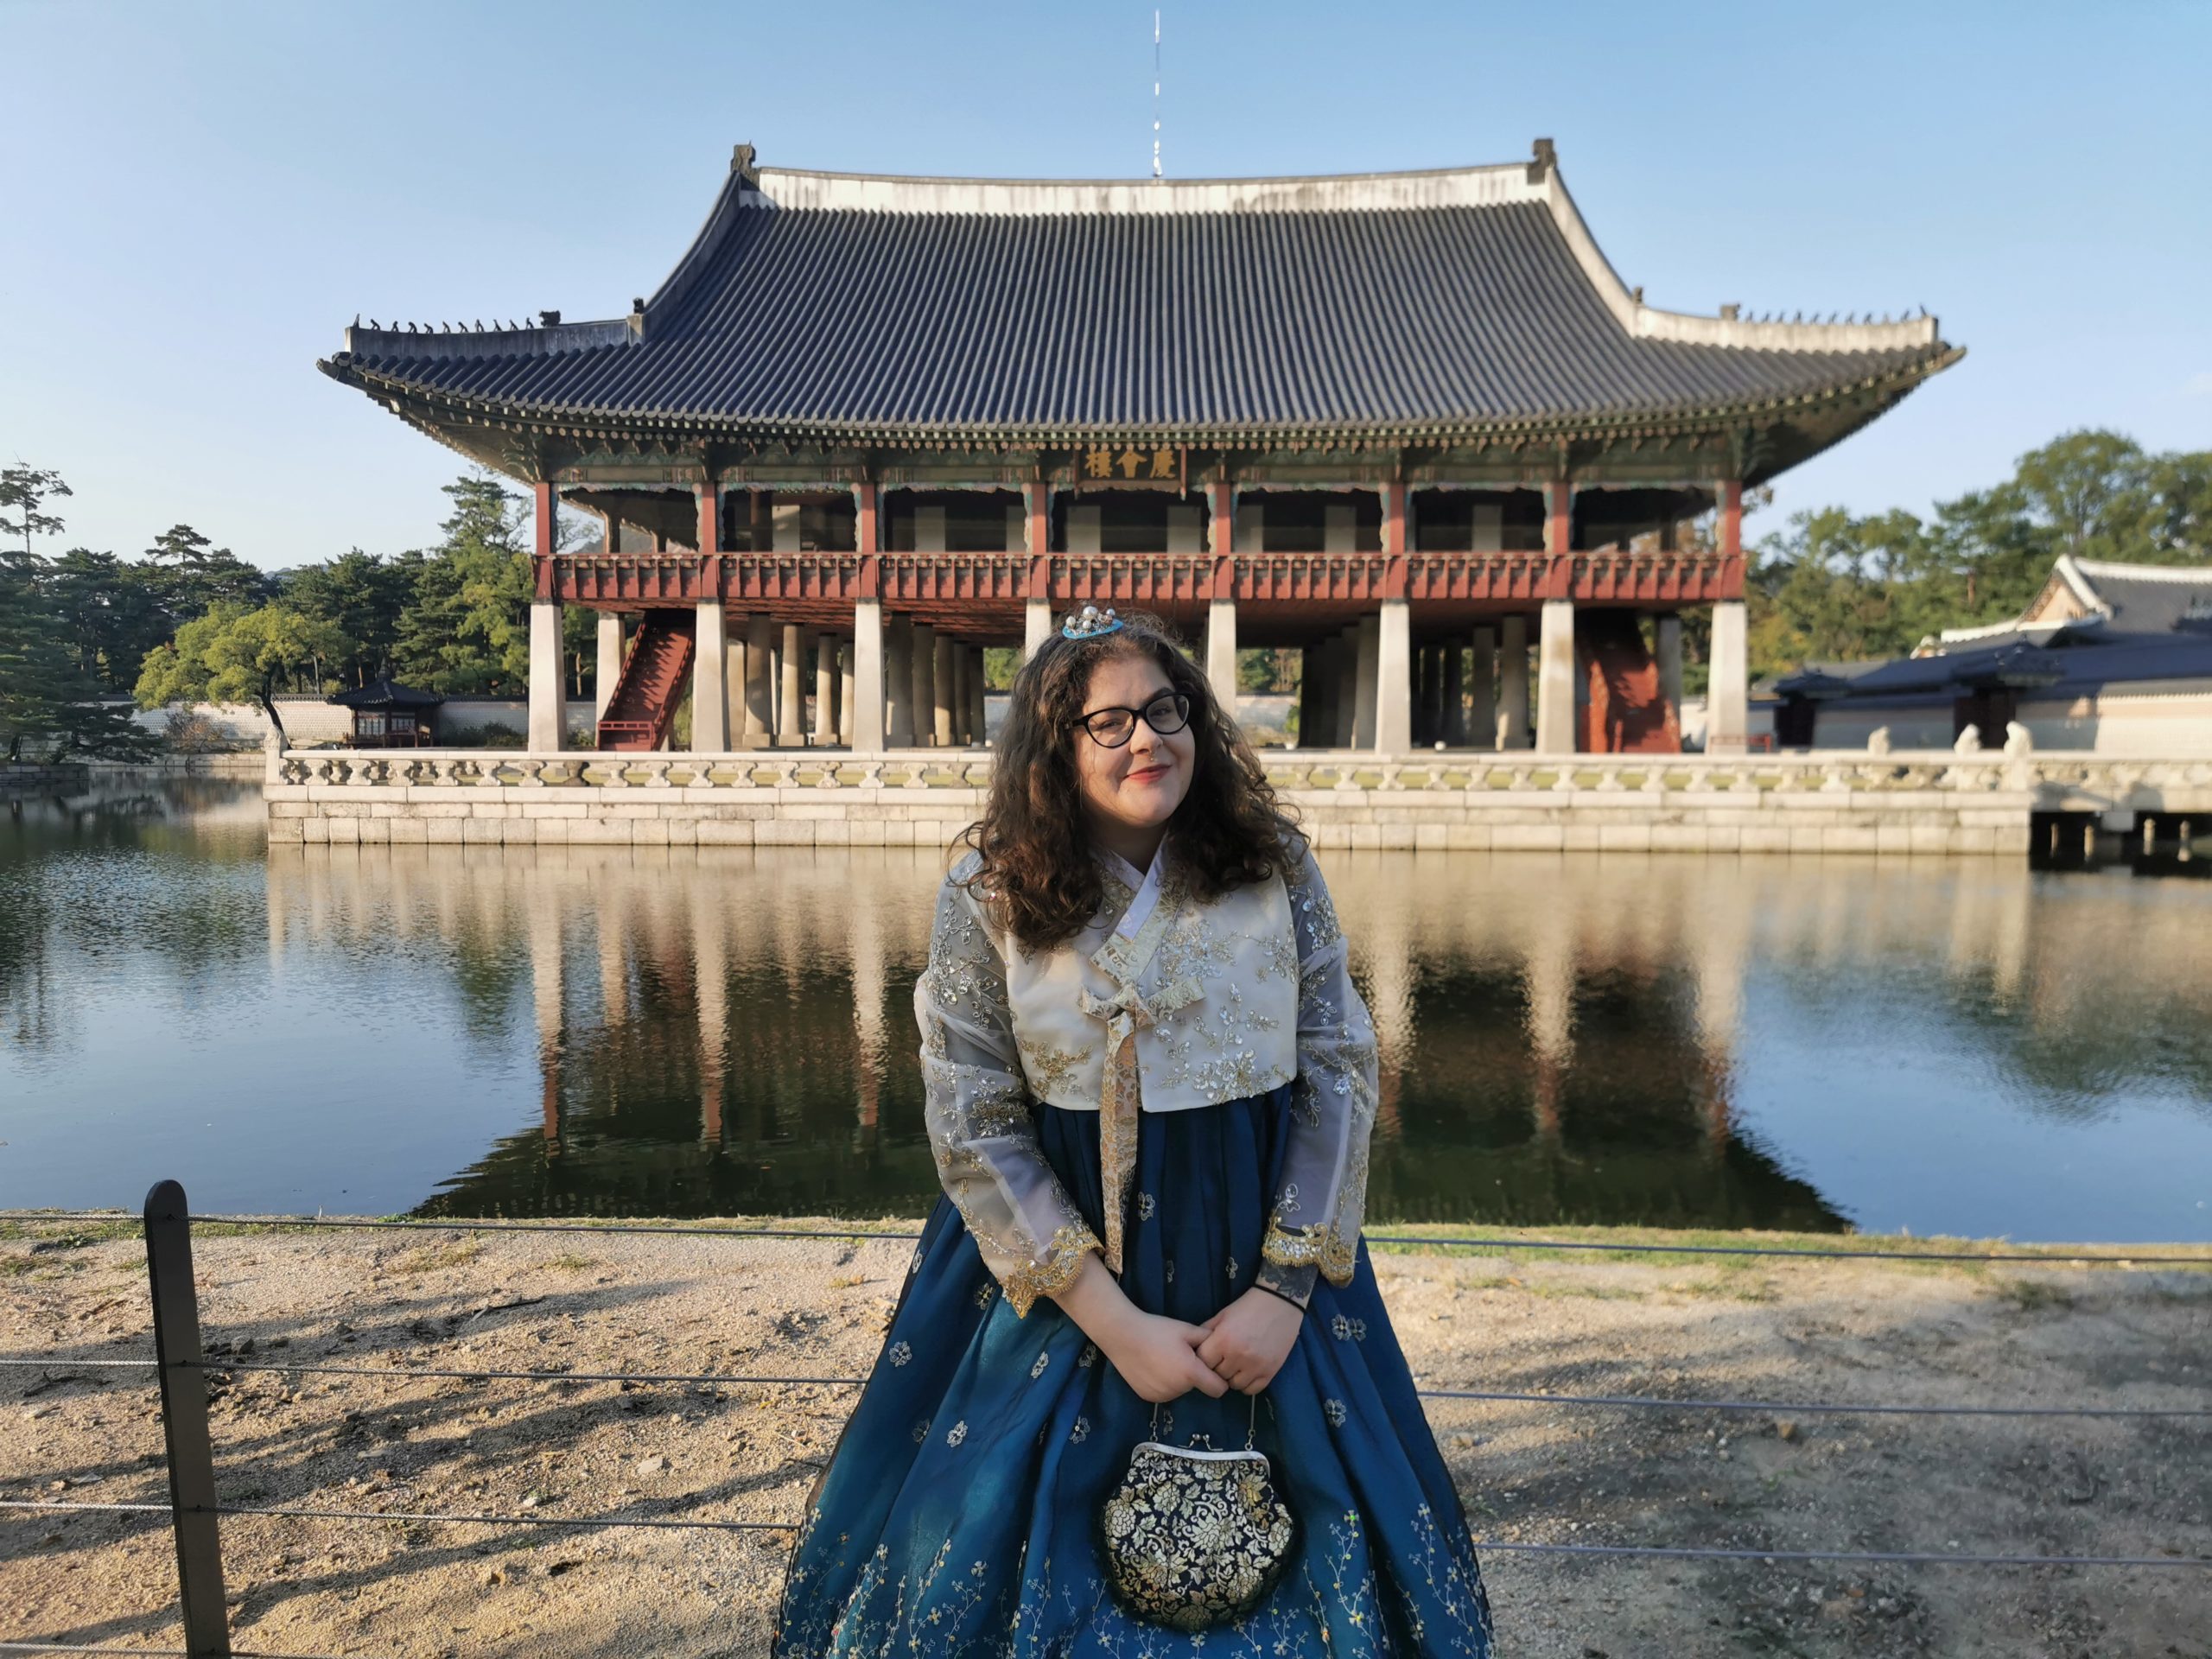 Being a plus-sized woman in South Korea is not easy but the travel opportunities make up for it.